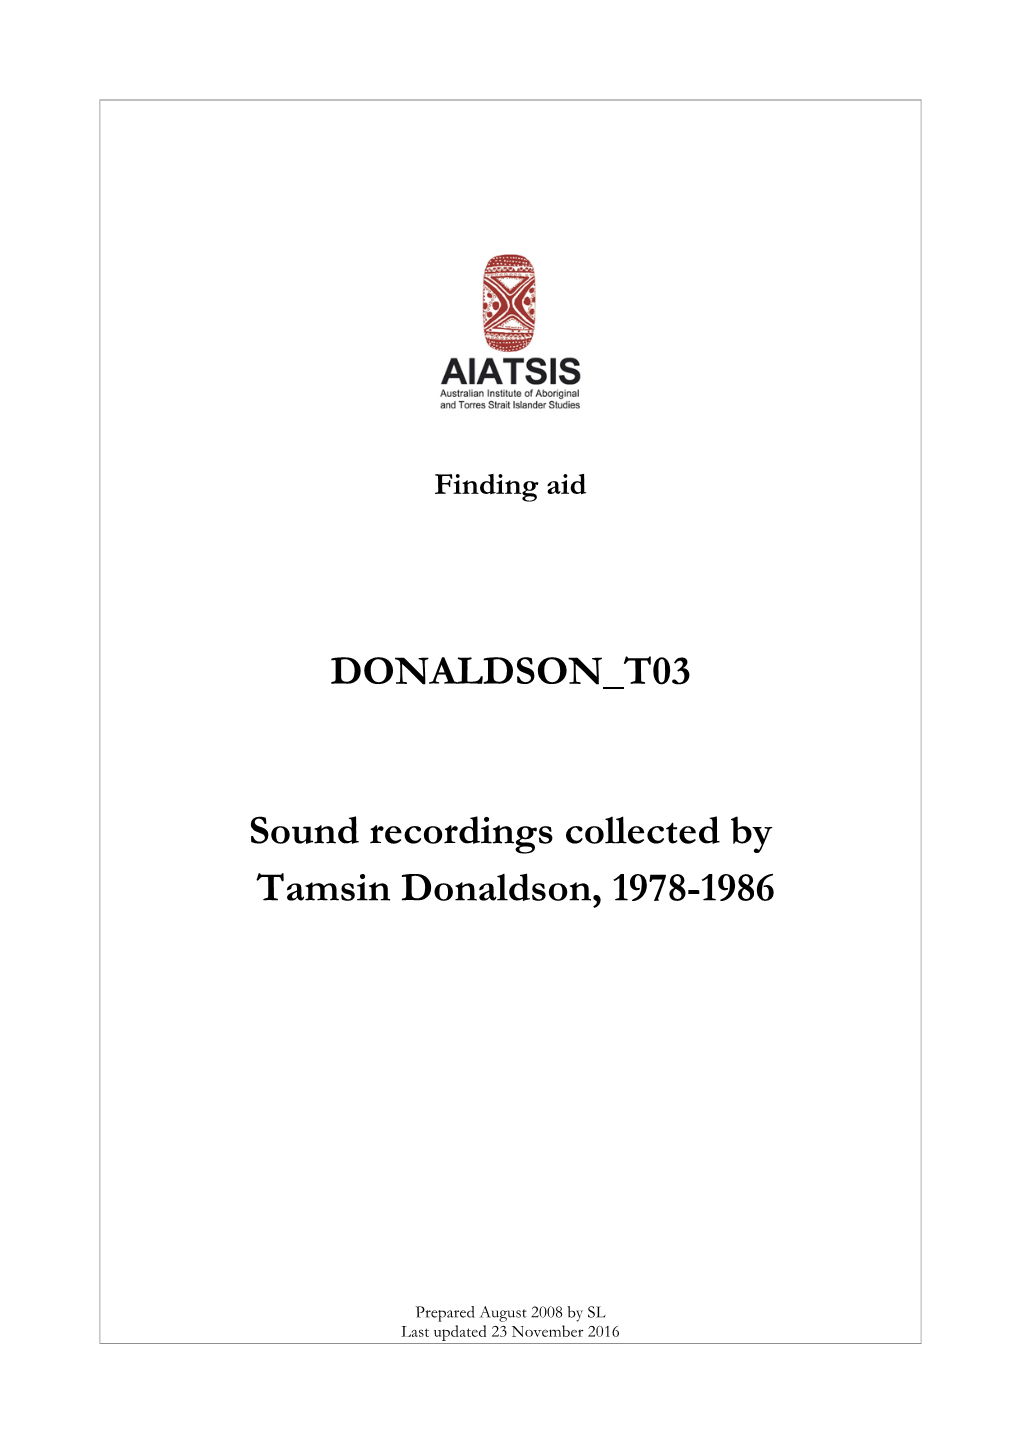 Guide to Sound Recordings by Tamsin Donaldson